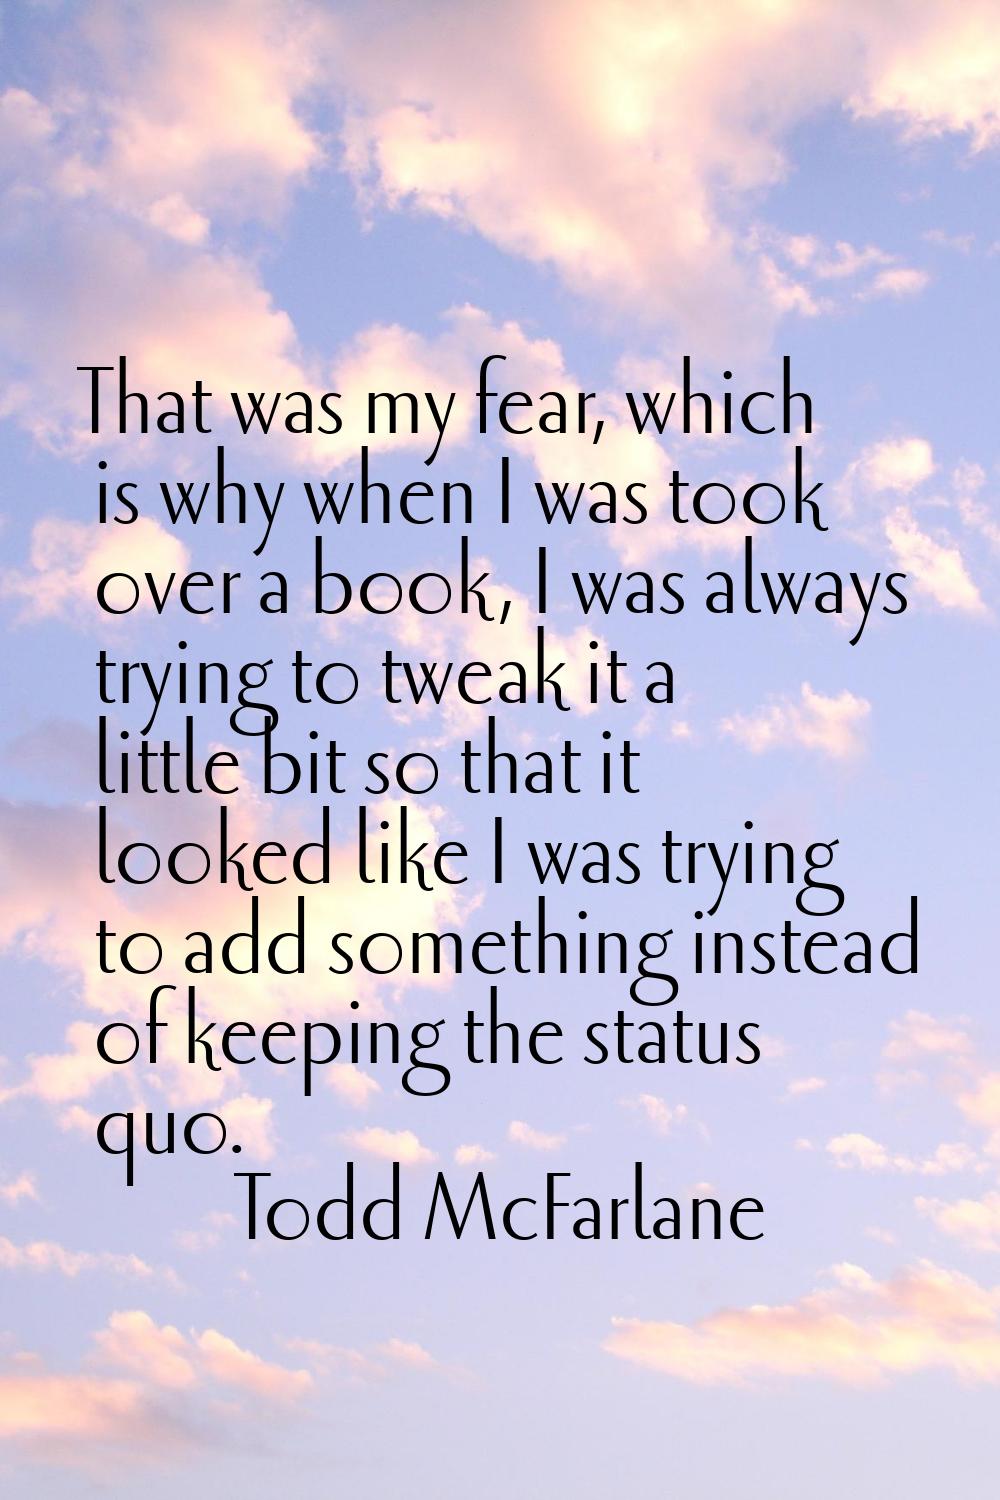 That was my fear, which is why when I was took over a book, I was always trying to tweak it a littl